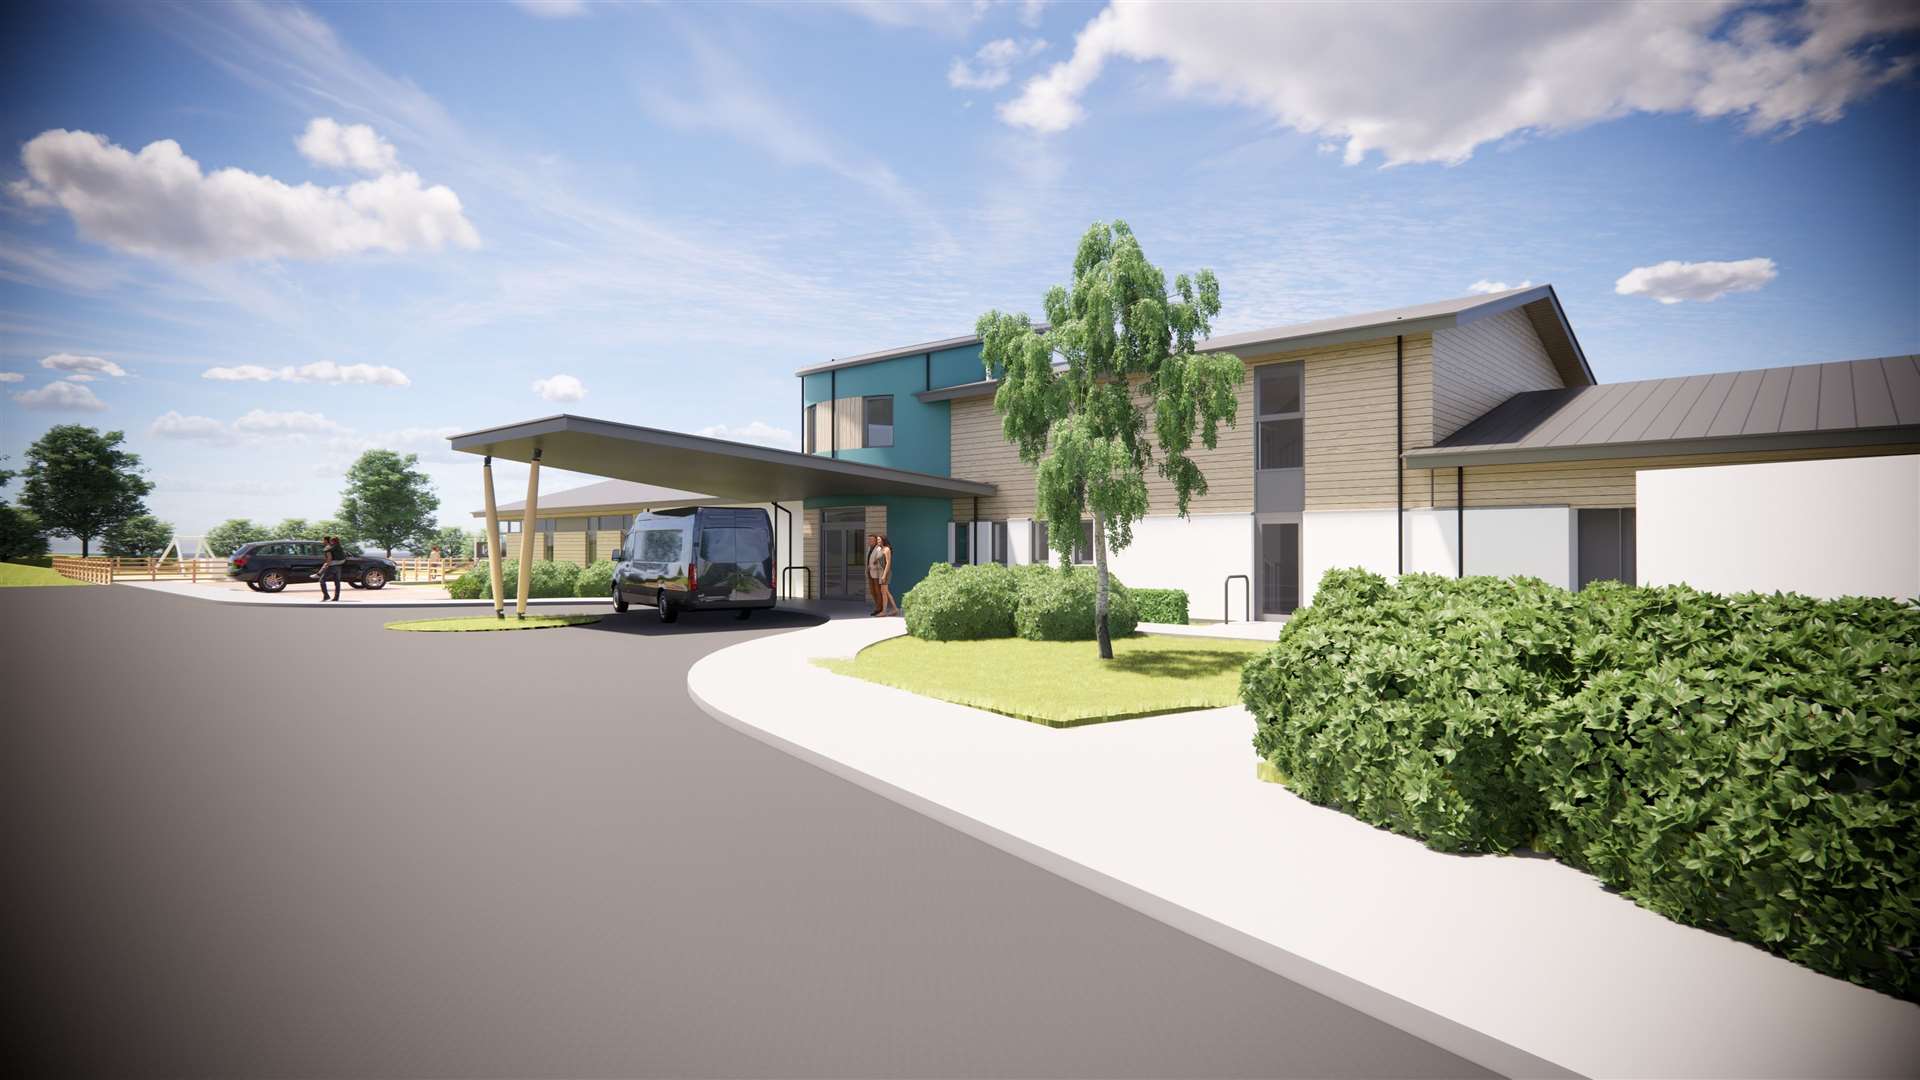 An illustration of what the Haven Center will look like for young people with learning disabilities and complex needs.